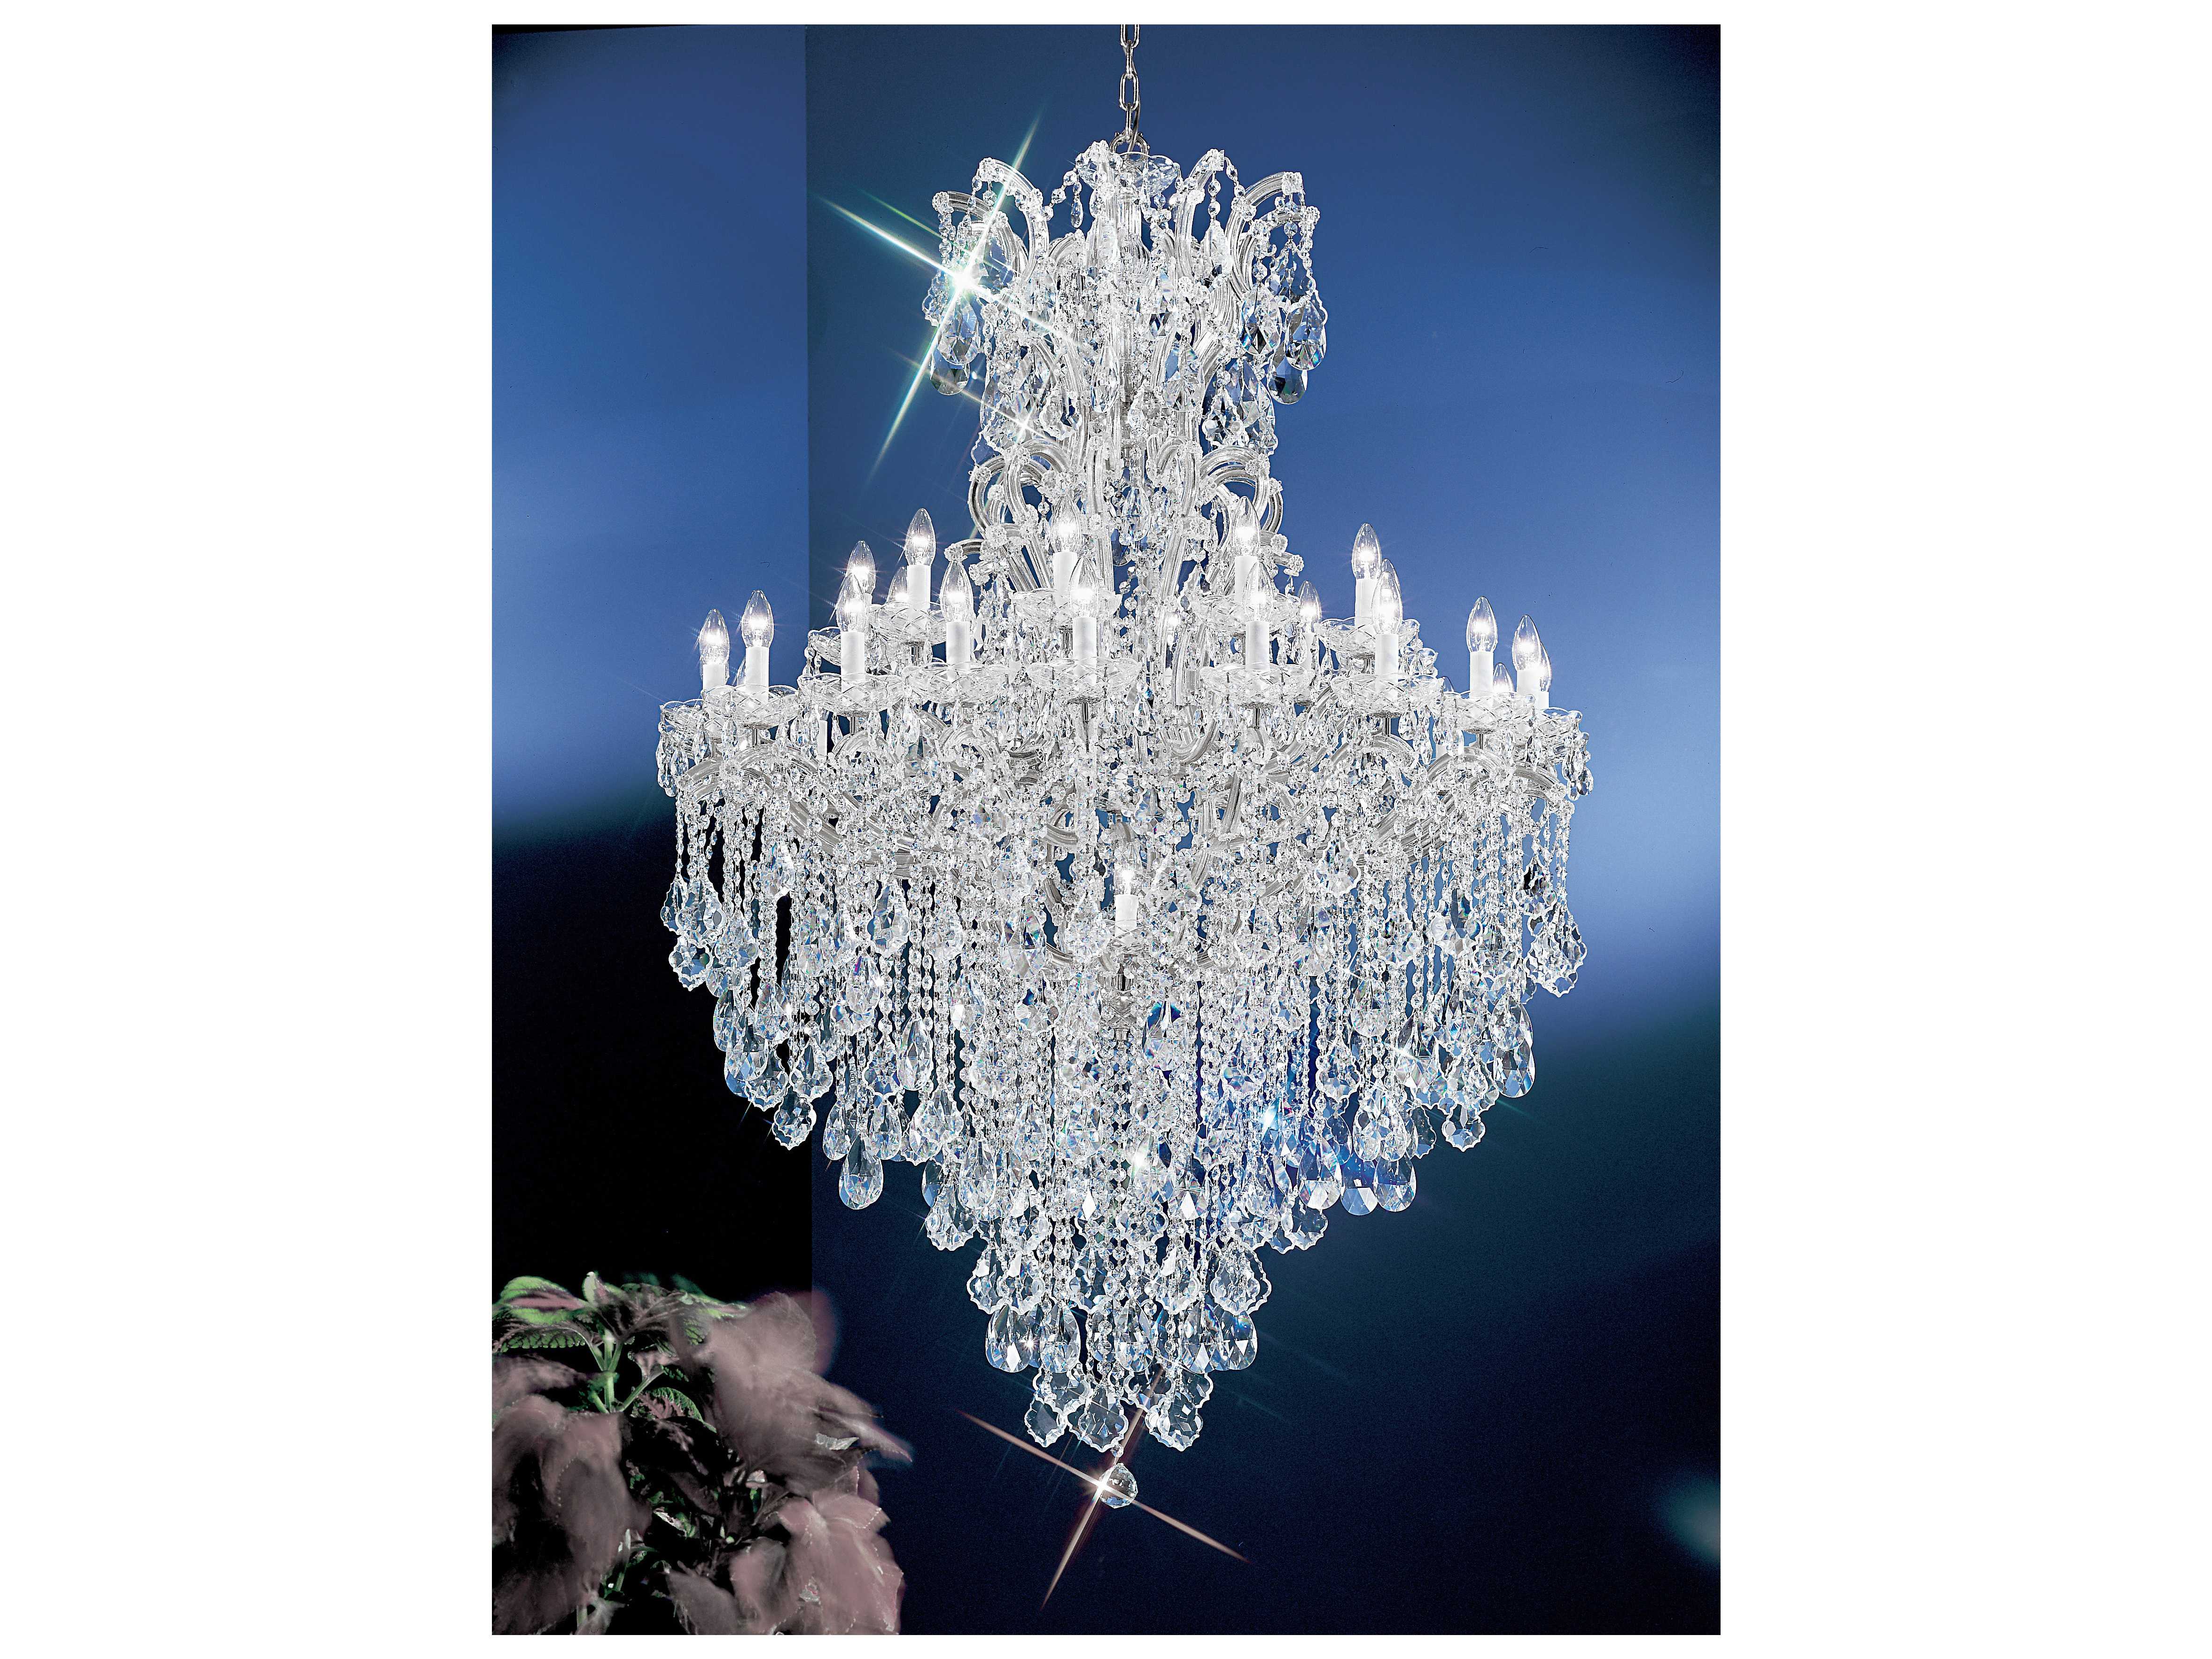 Classic Lighting Maria Theresa 3 Light Tiered Crystal Chandelier